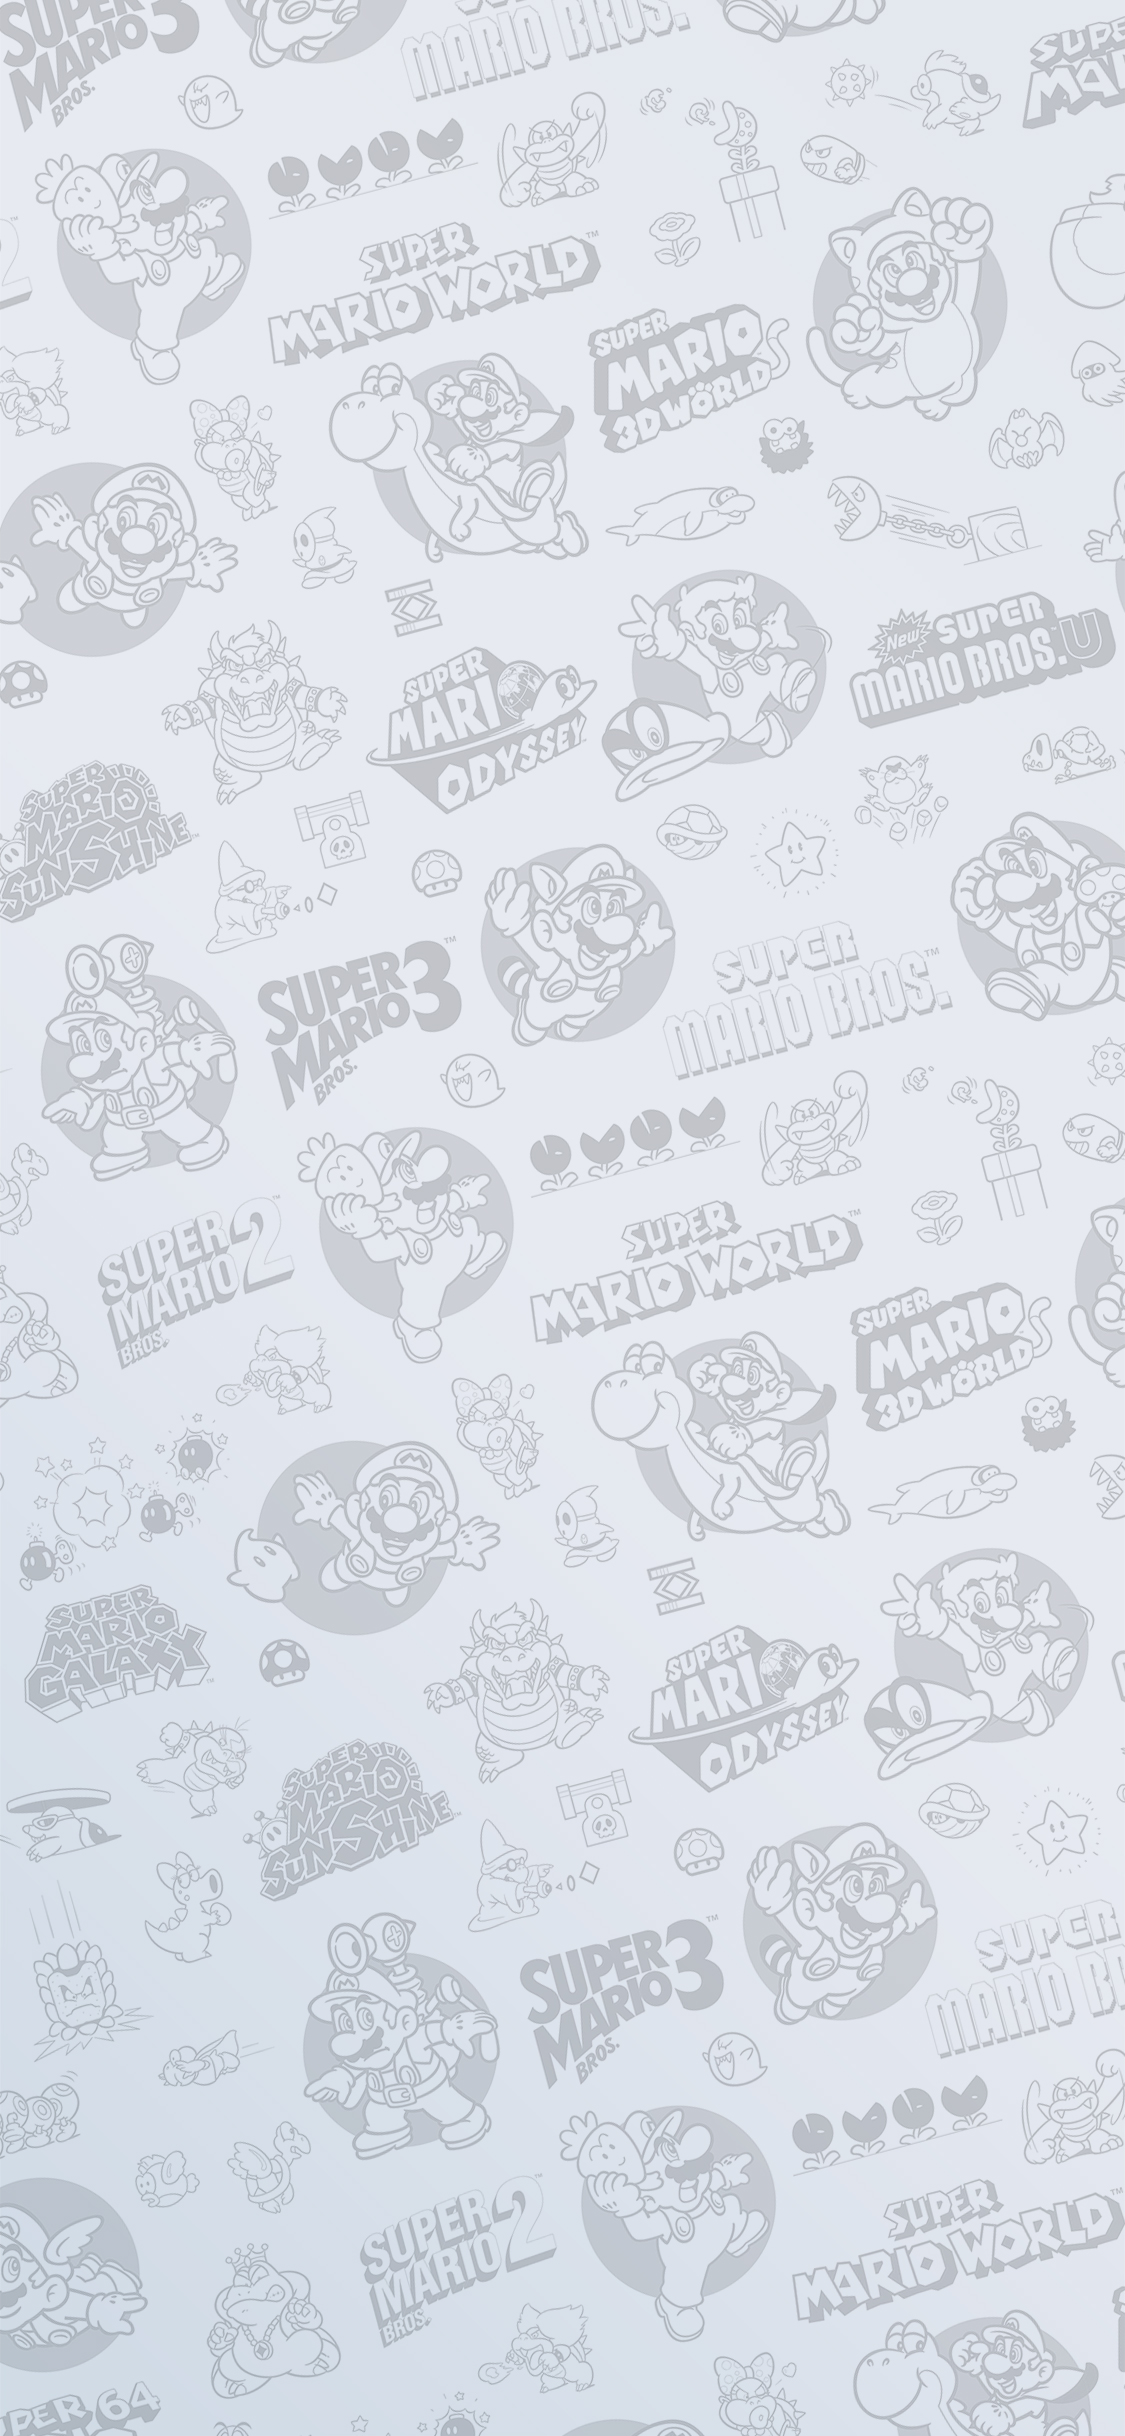 Super Mario Bros 35th Anniversary Pattern Wallpaper - Cat with Monocle